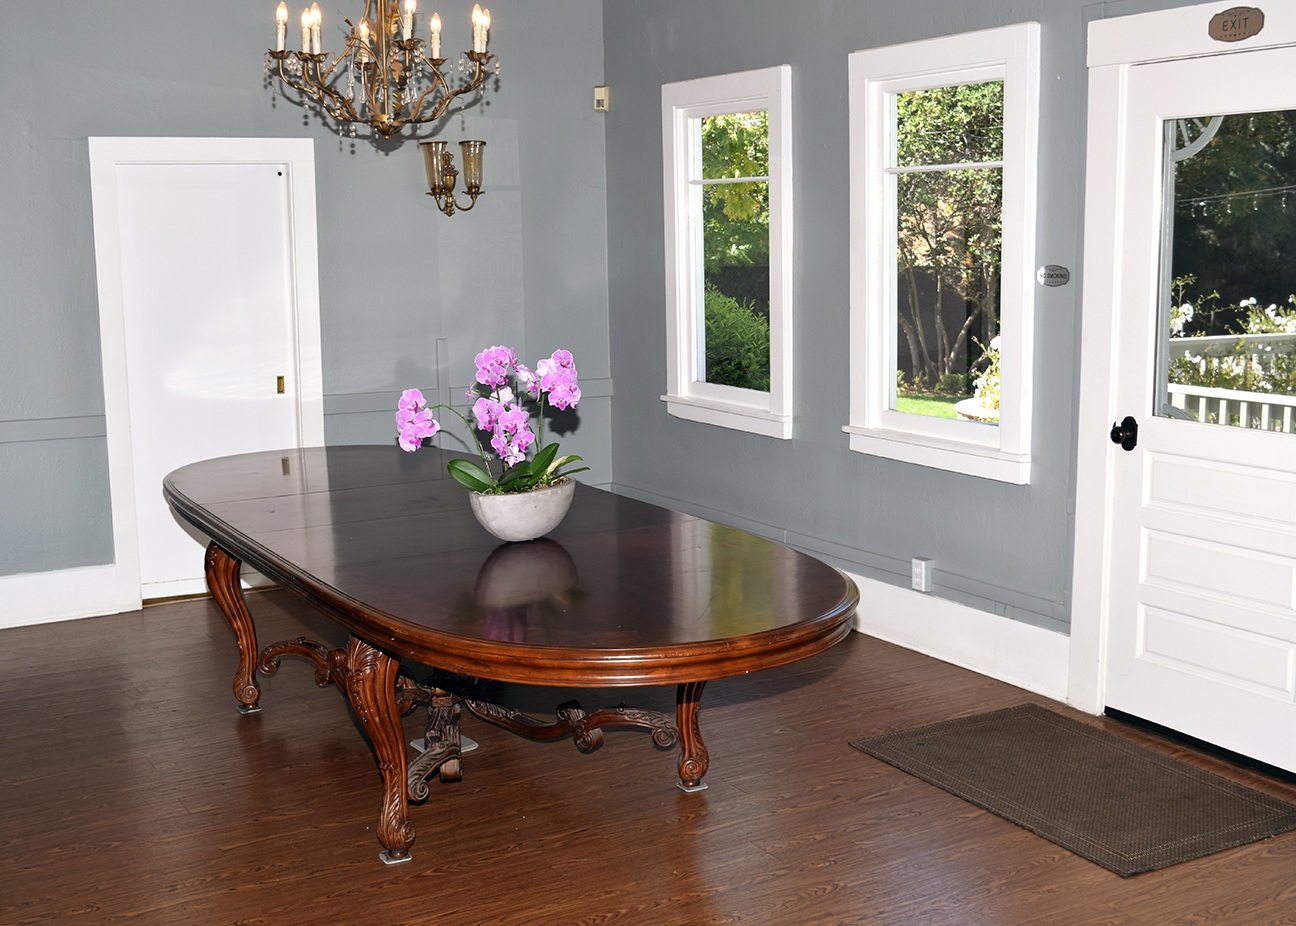 Interior: Dining Room Table